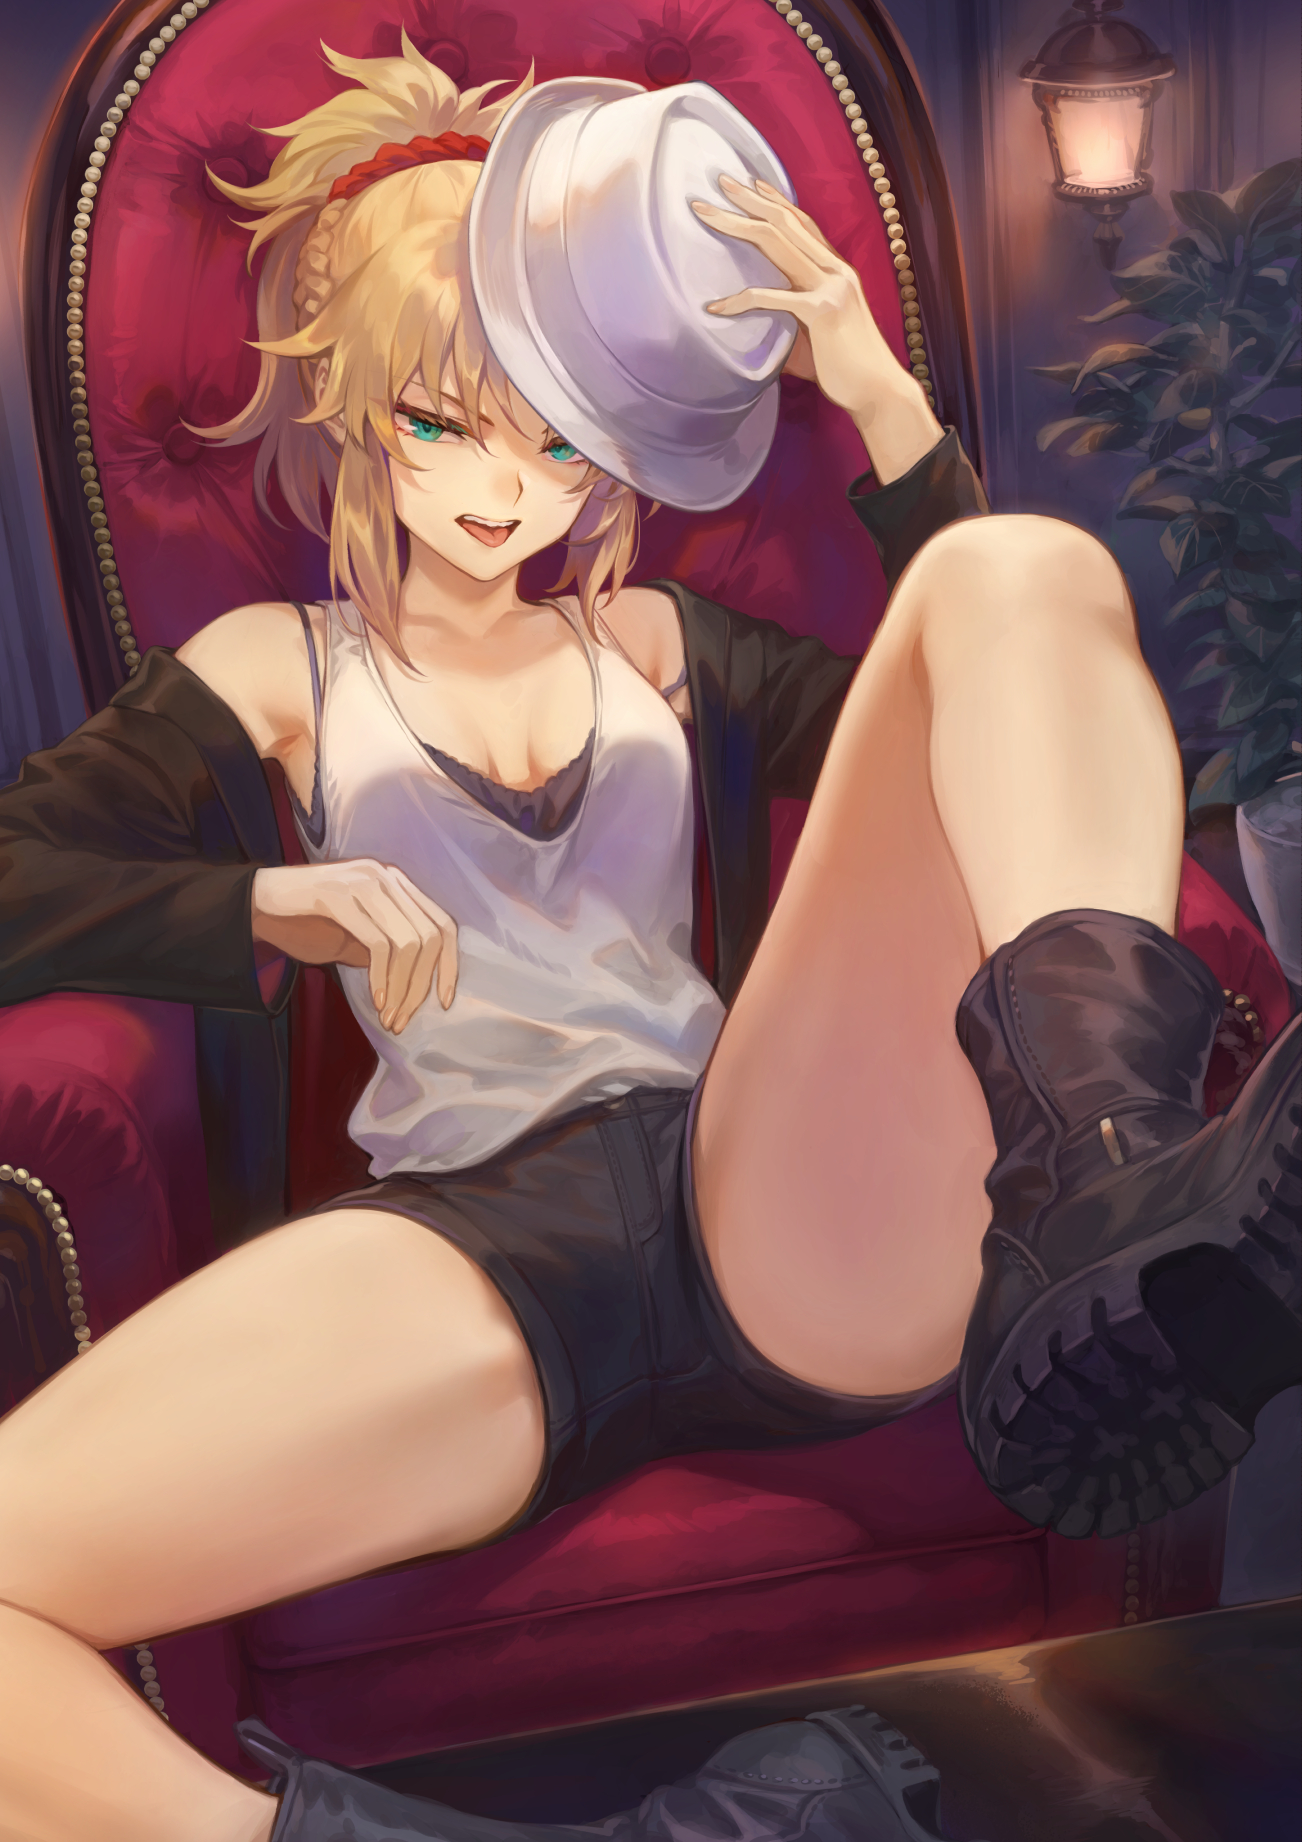 Anime 1302x1842 anime anime girls digital art artwork 2D portrait display Fate series Fate/Grand Order Fate/Apocrypha  blonde green eyes short shorts spread legs thighs black boots white hat ponytail tongue out ecchi white tank top looking at viewer open jacket long hair cleavage small boobs Mordred (Fate/Apocrypha) camisole bangs sitting alternate costume fan art Mashu 003